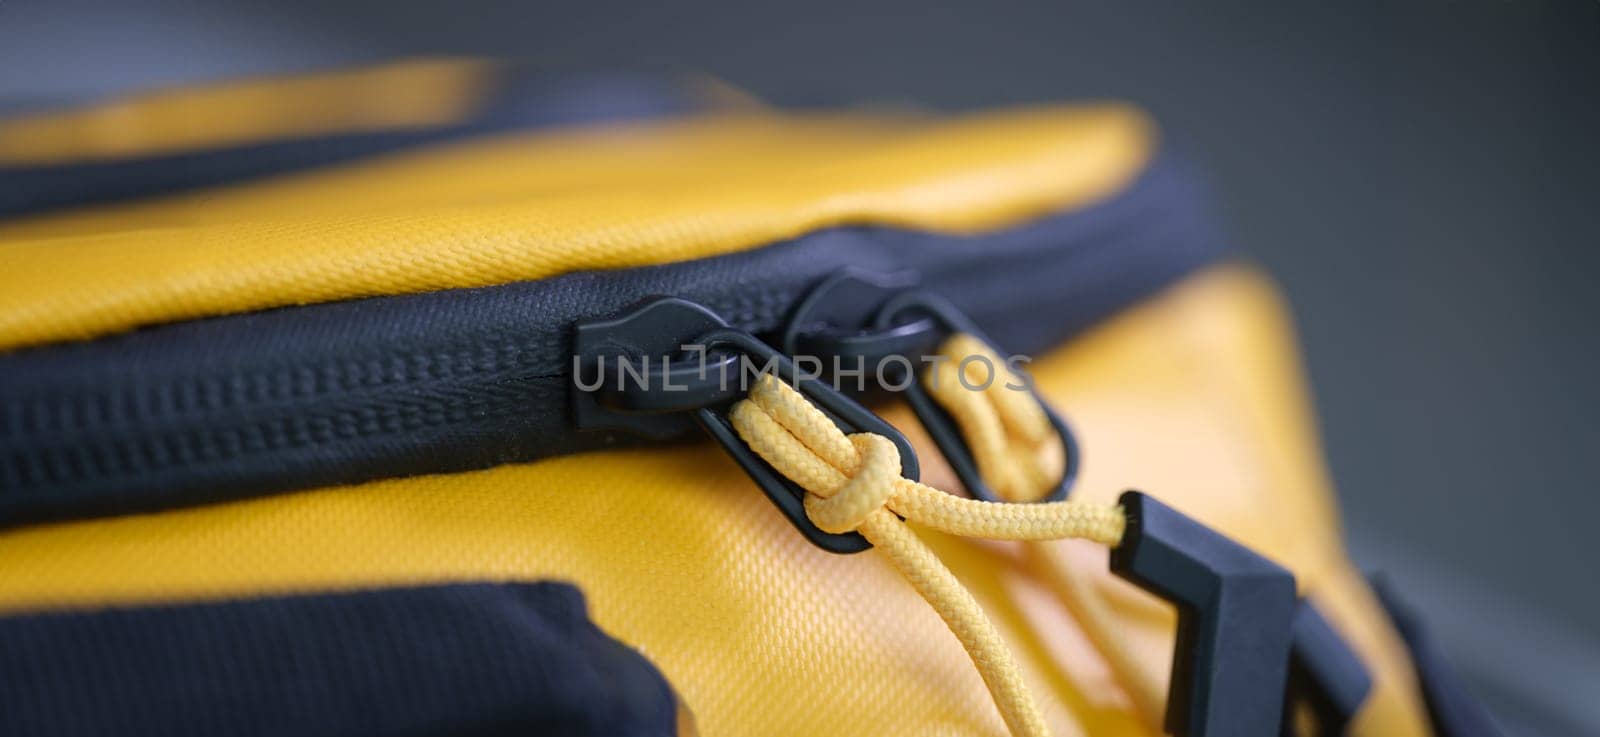 Zip lock with ropes on yellow backpack closeup by kuprevich